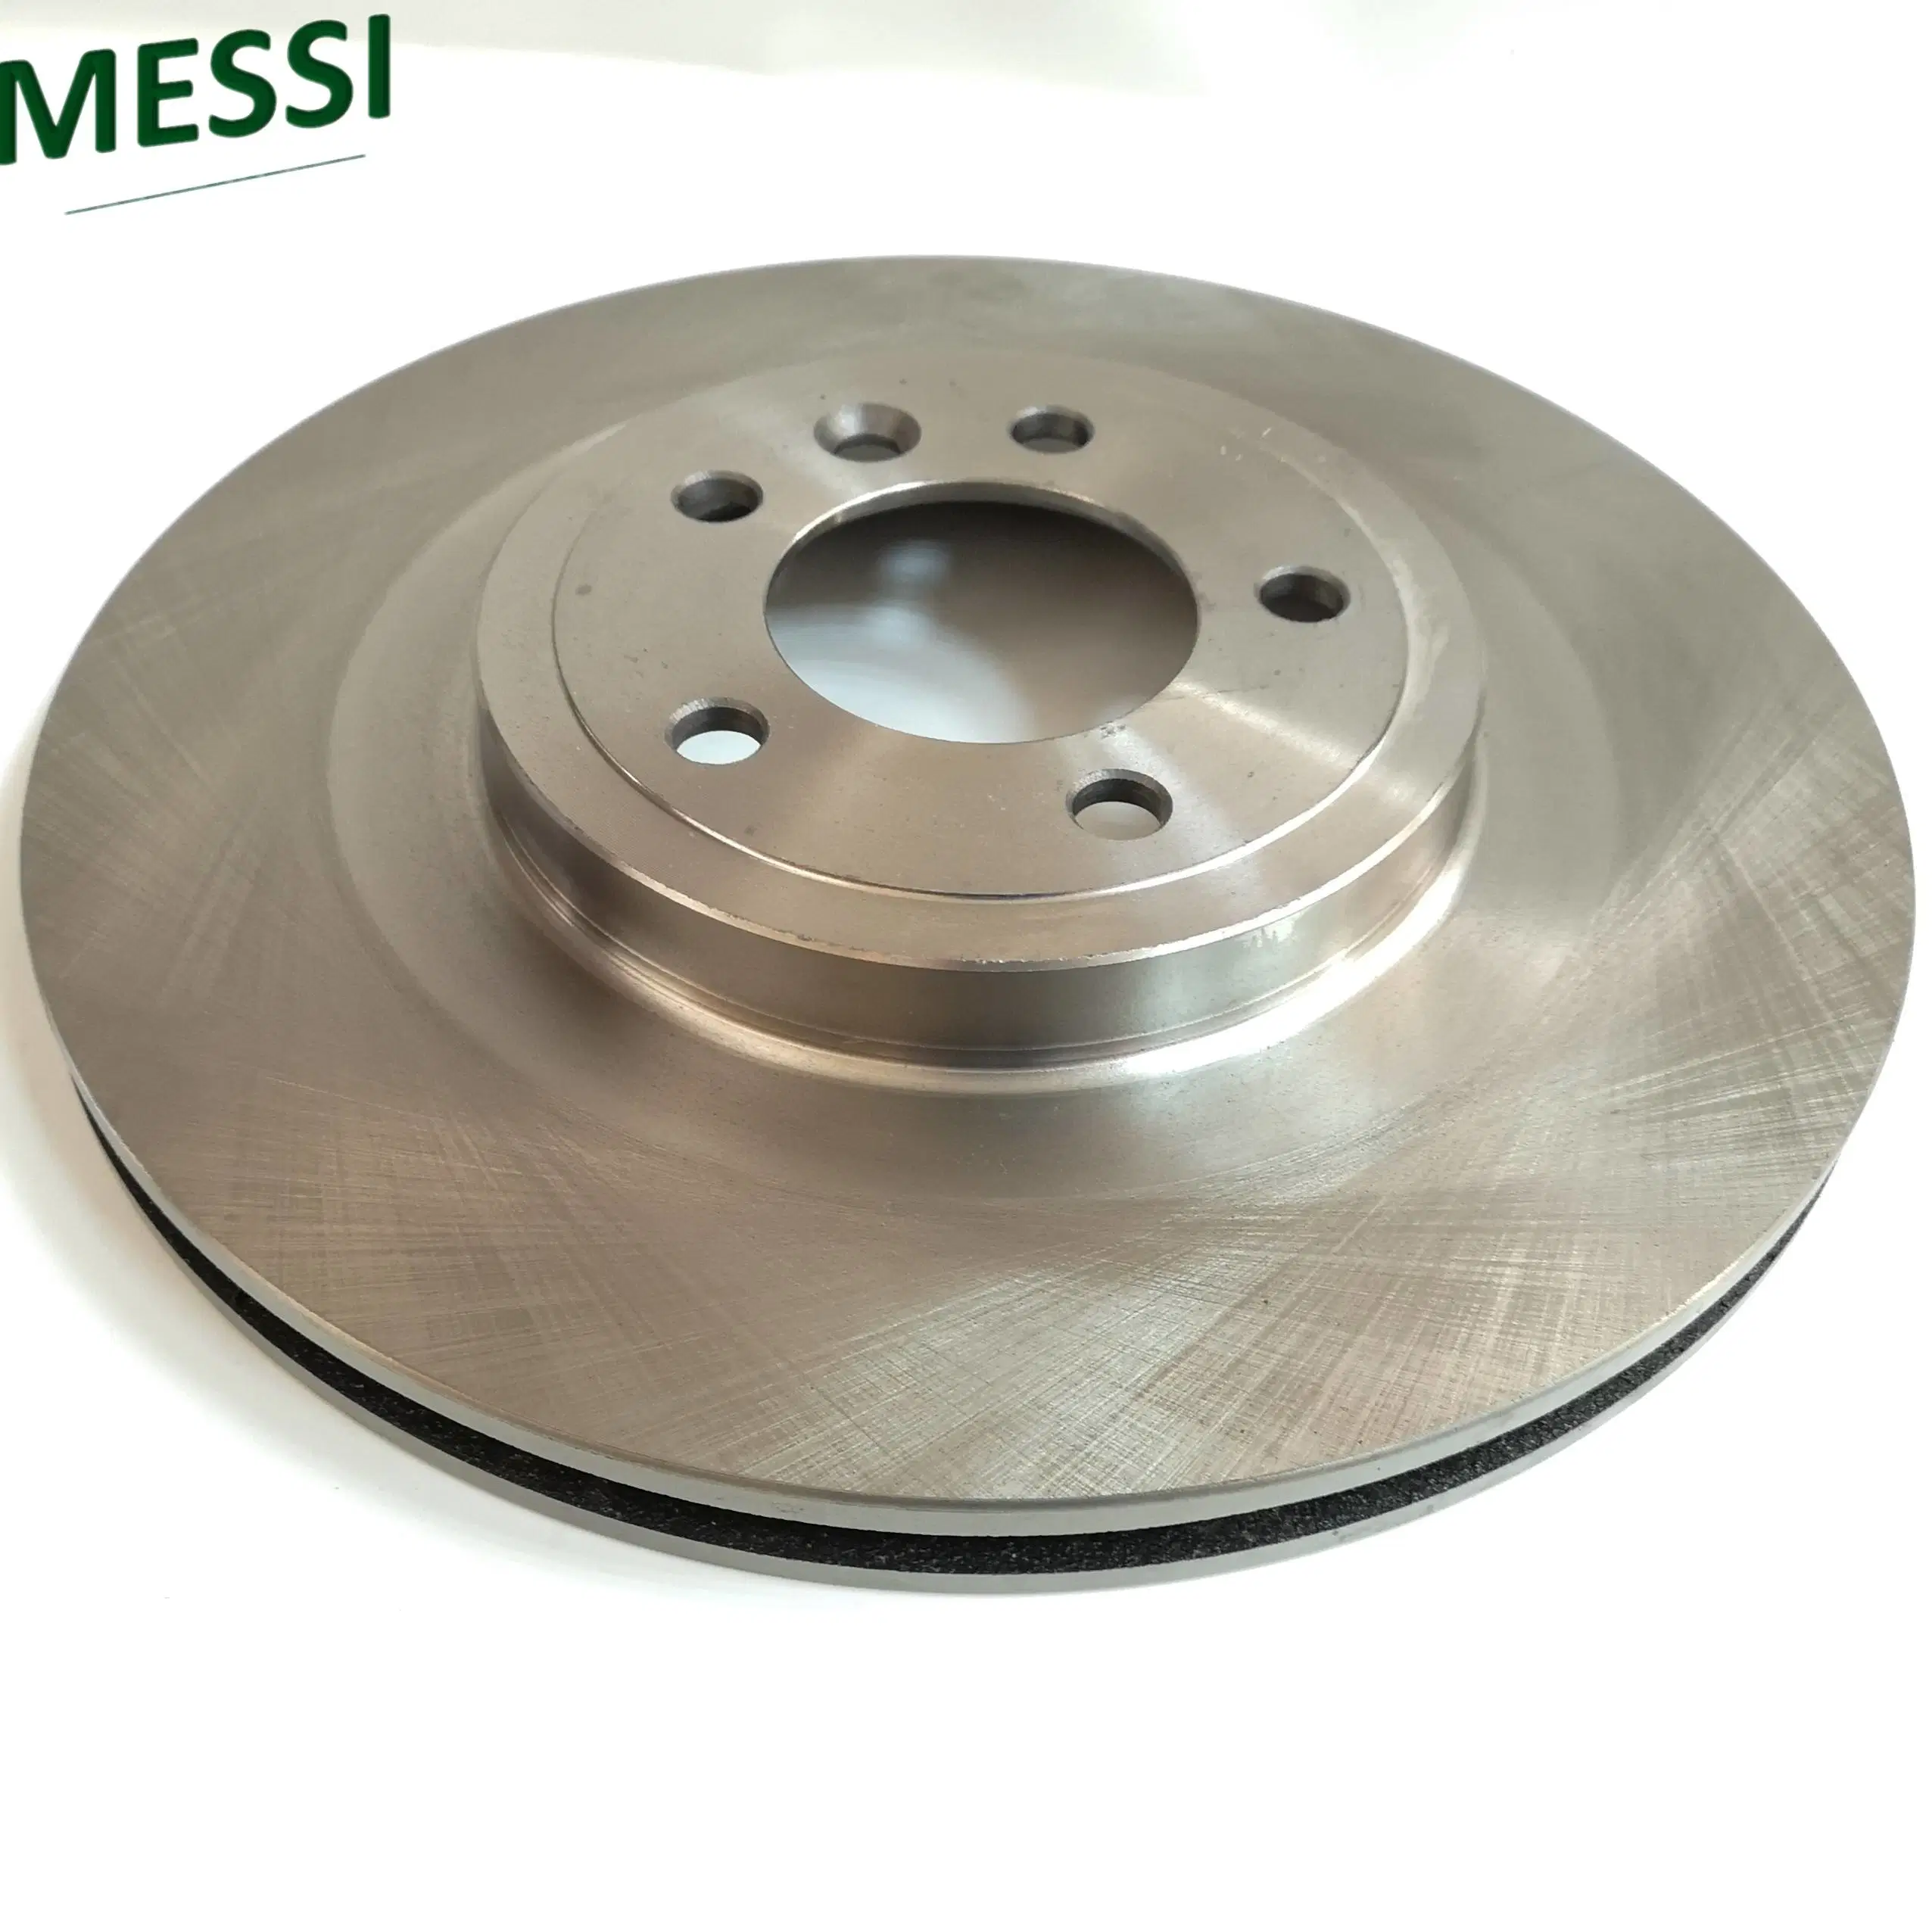 Besdt Quality China Factory Auto Parts Brake Dis for Car